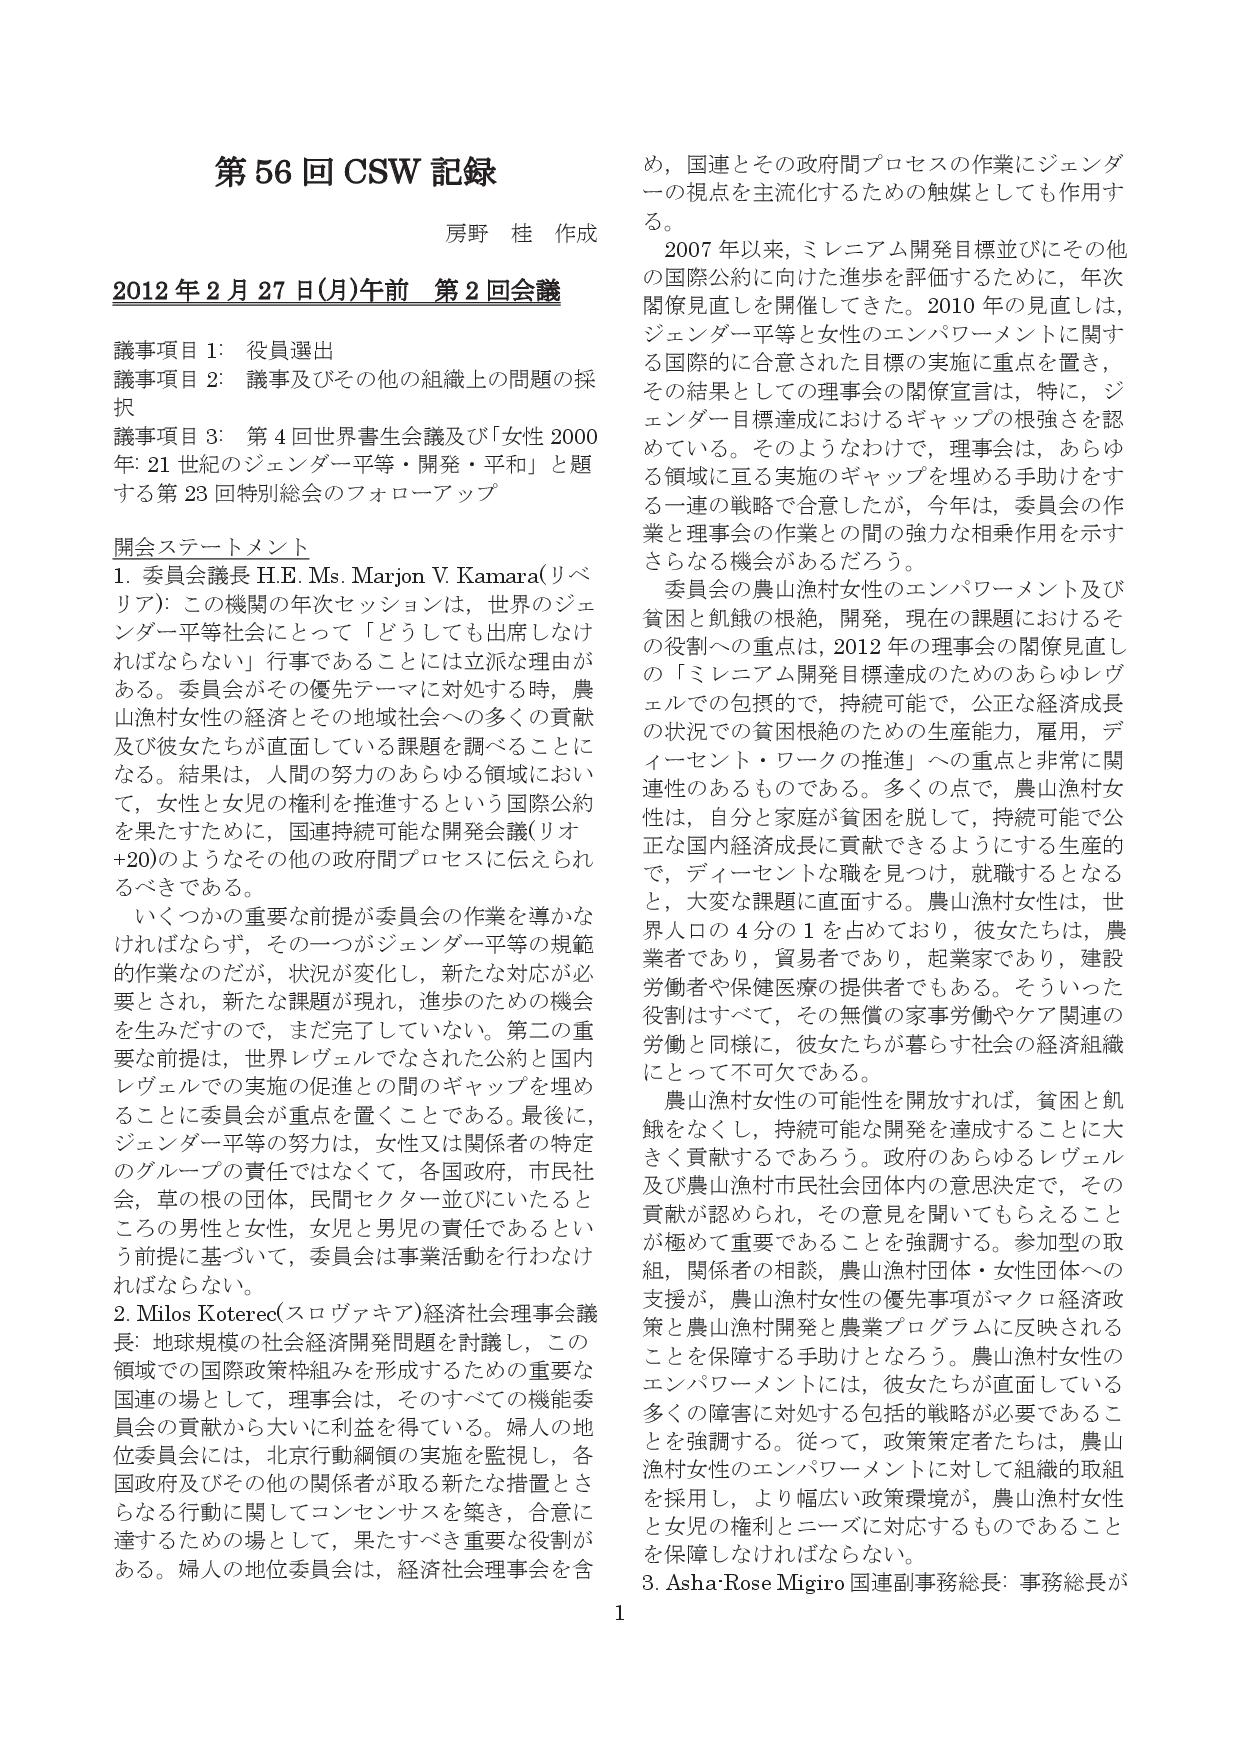 2012 CSW56記録 (2)